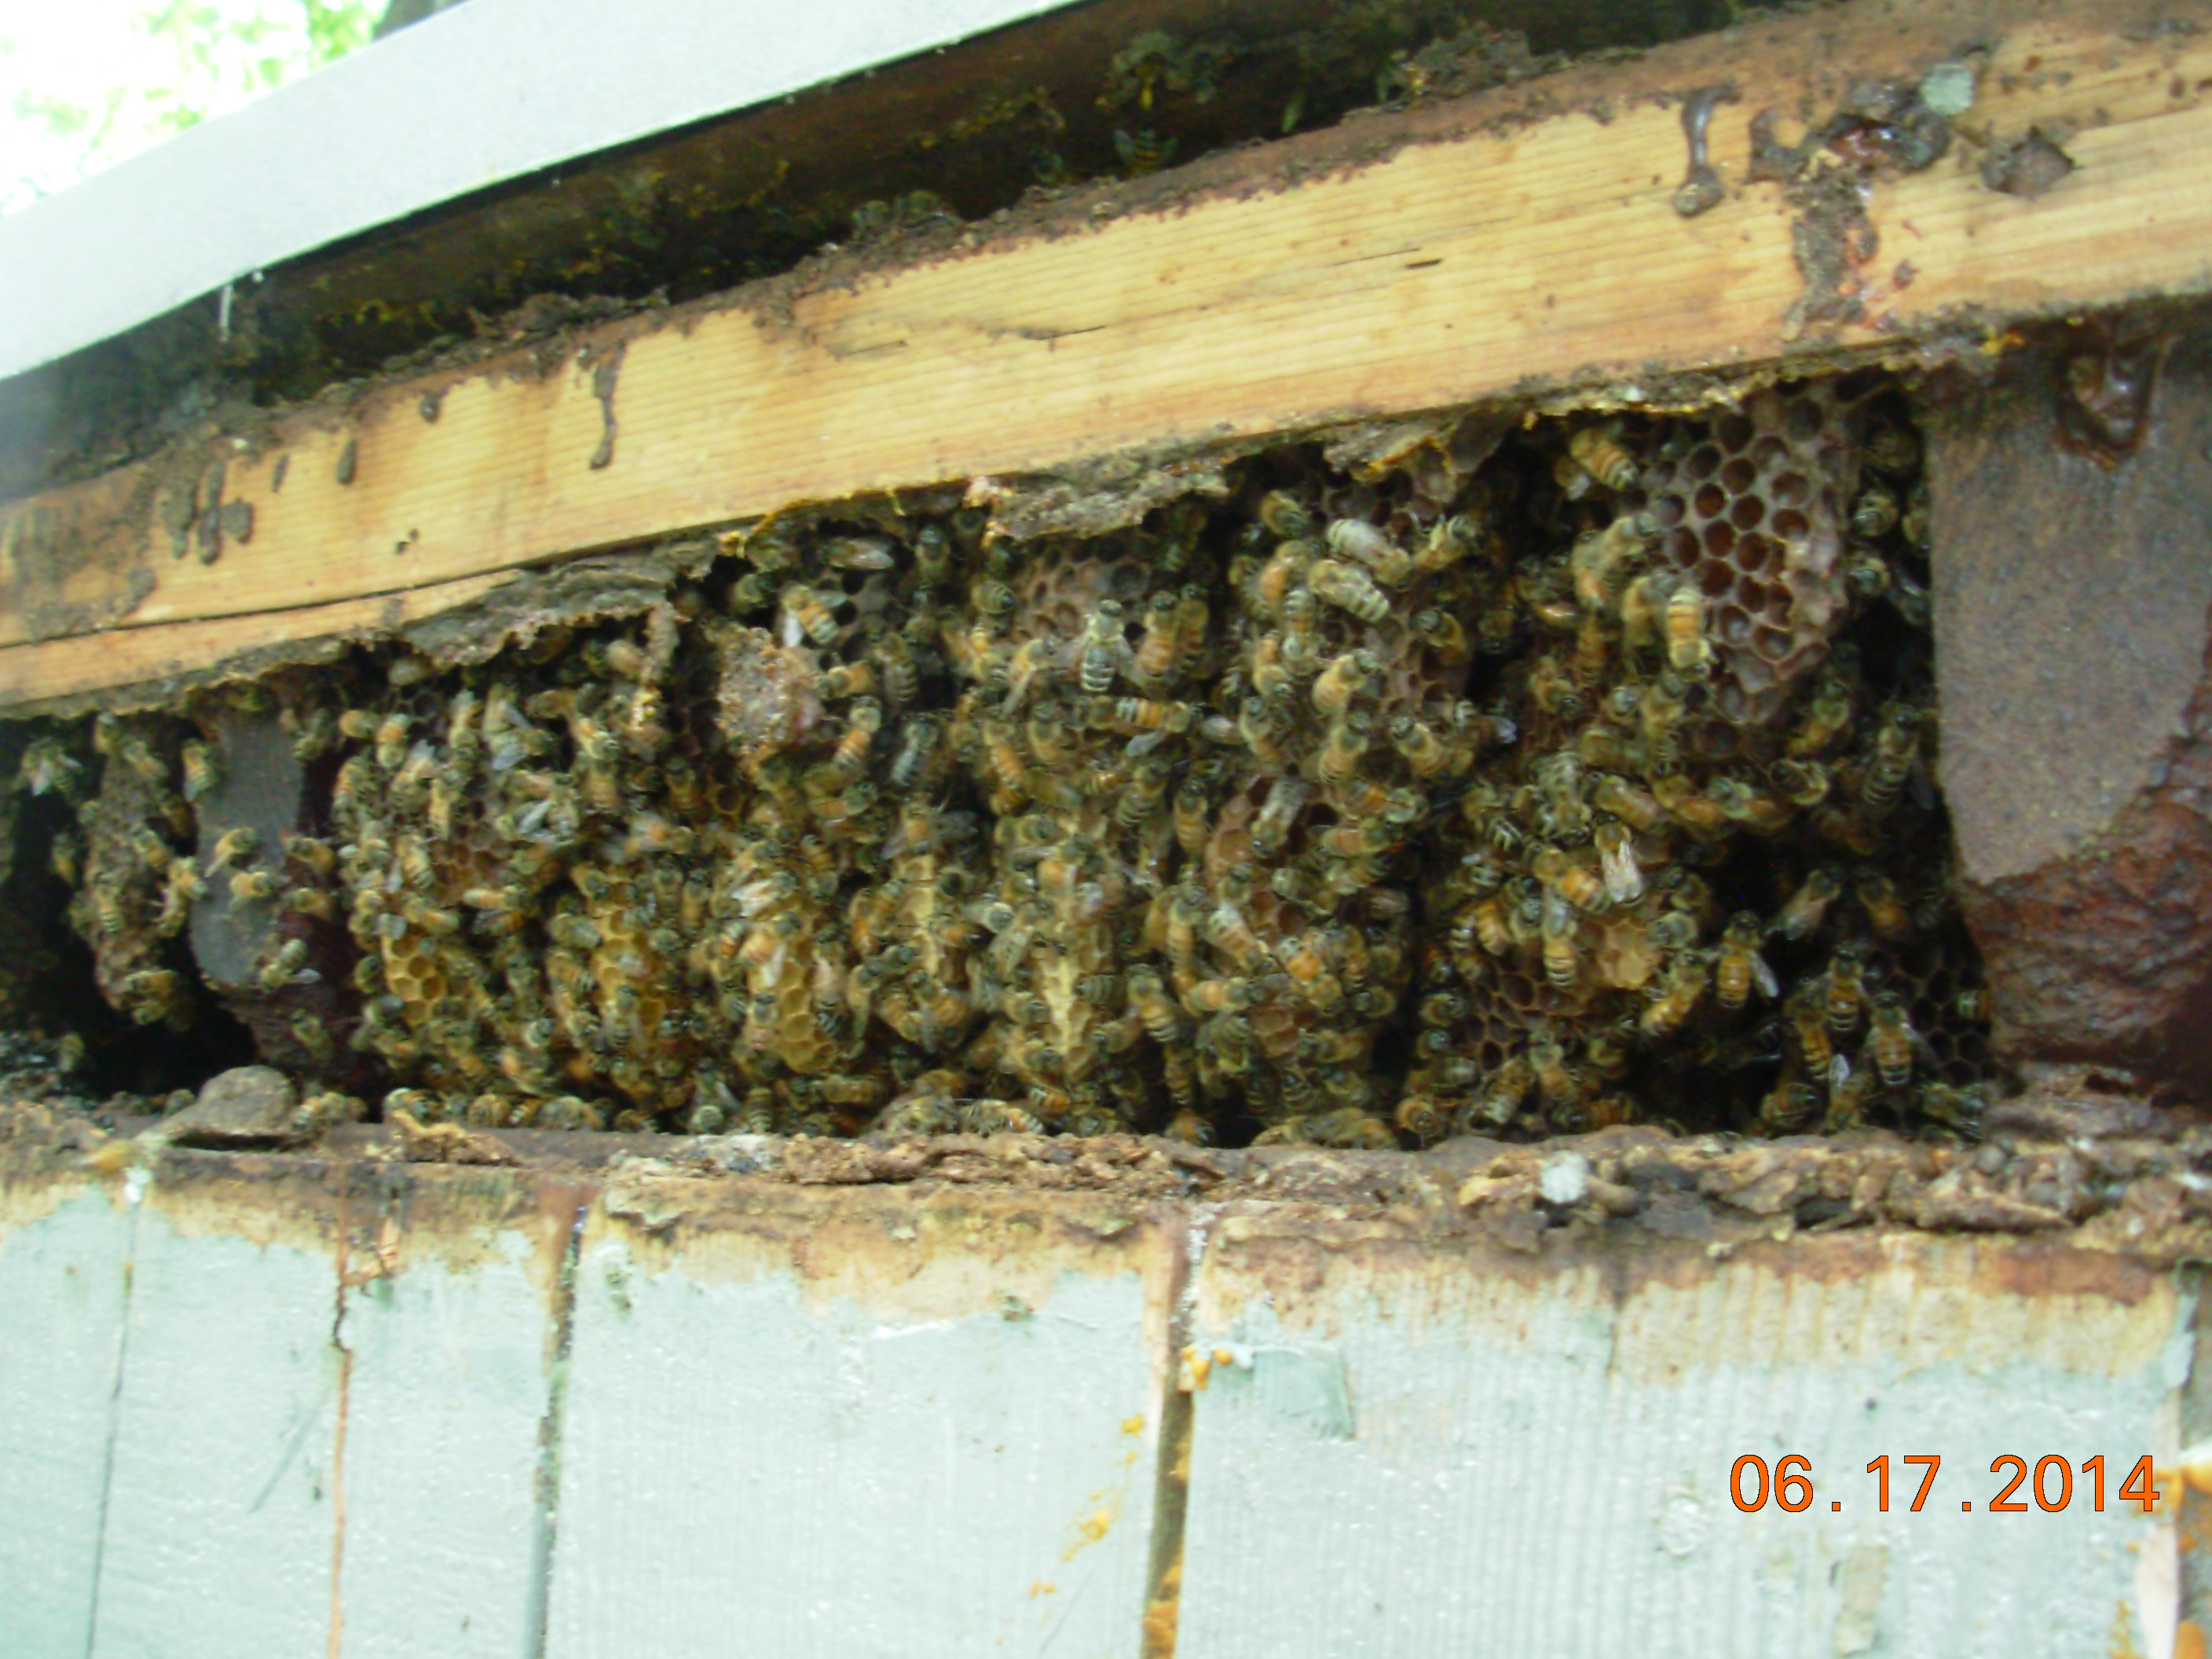 bee hive removal